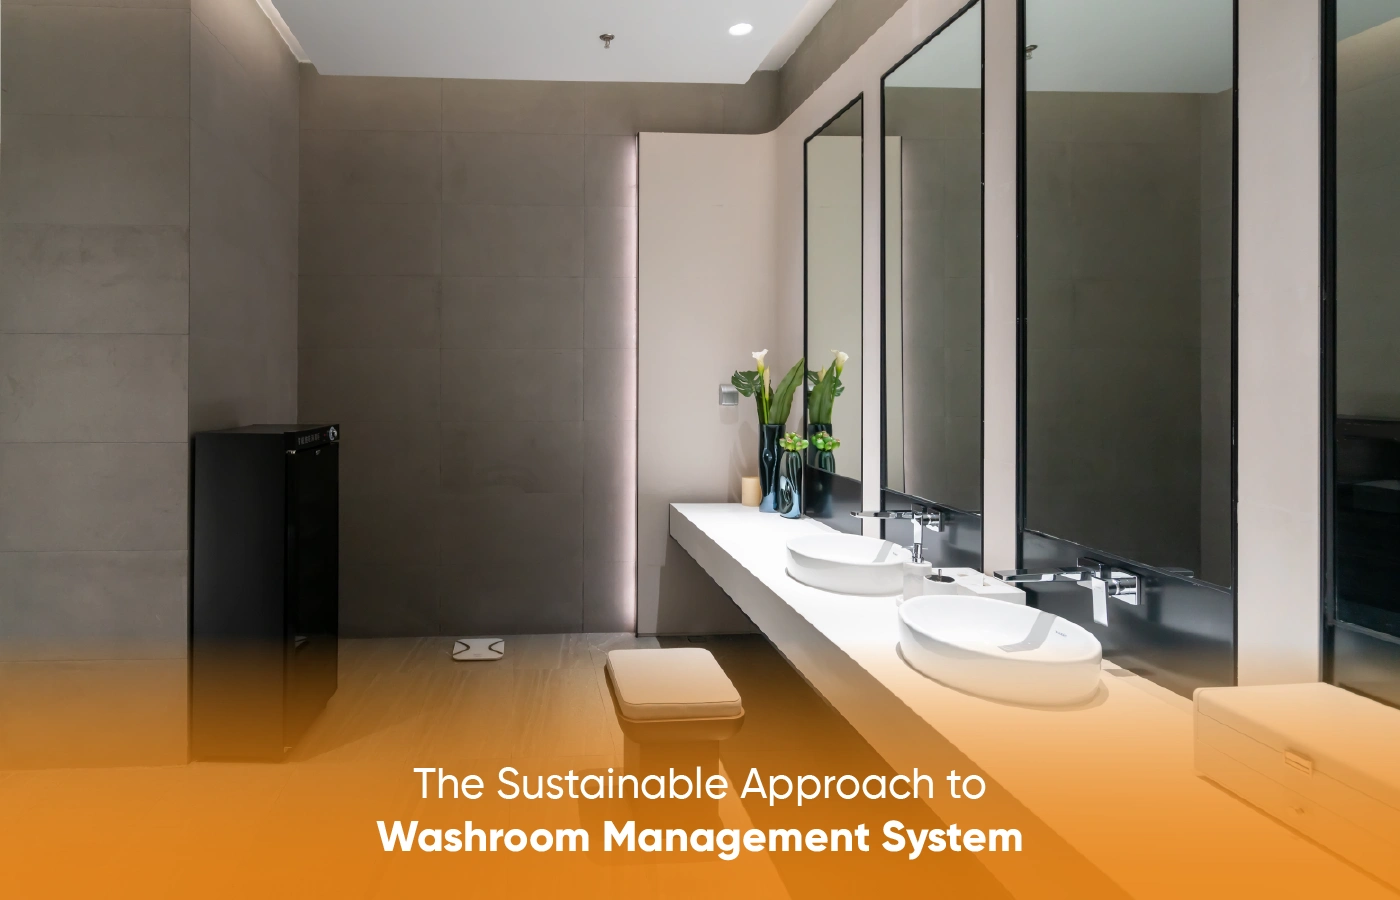 Washroom Management - Data-Driven Cleanliness